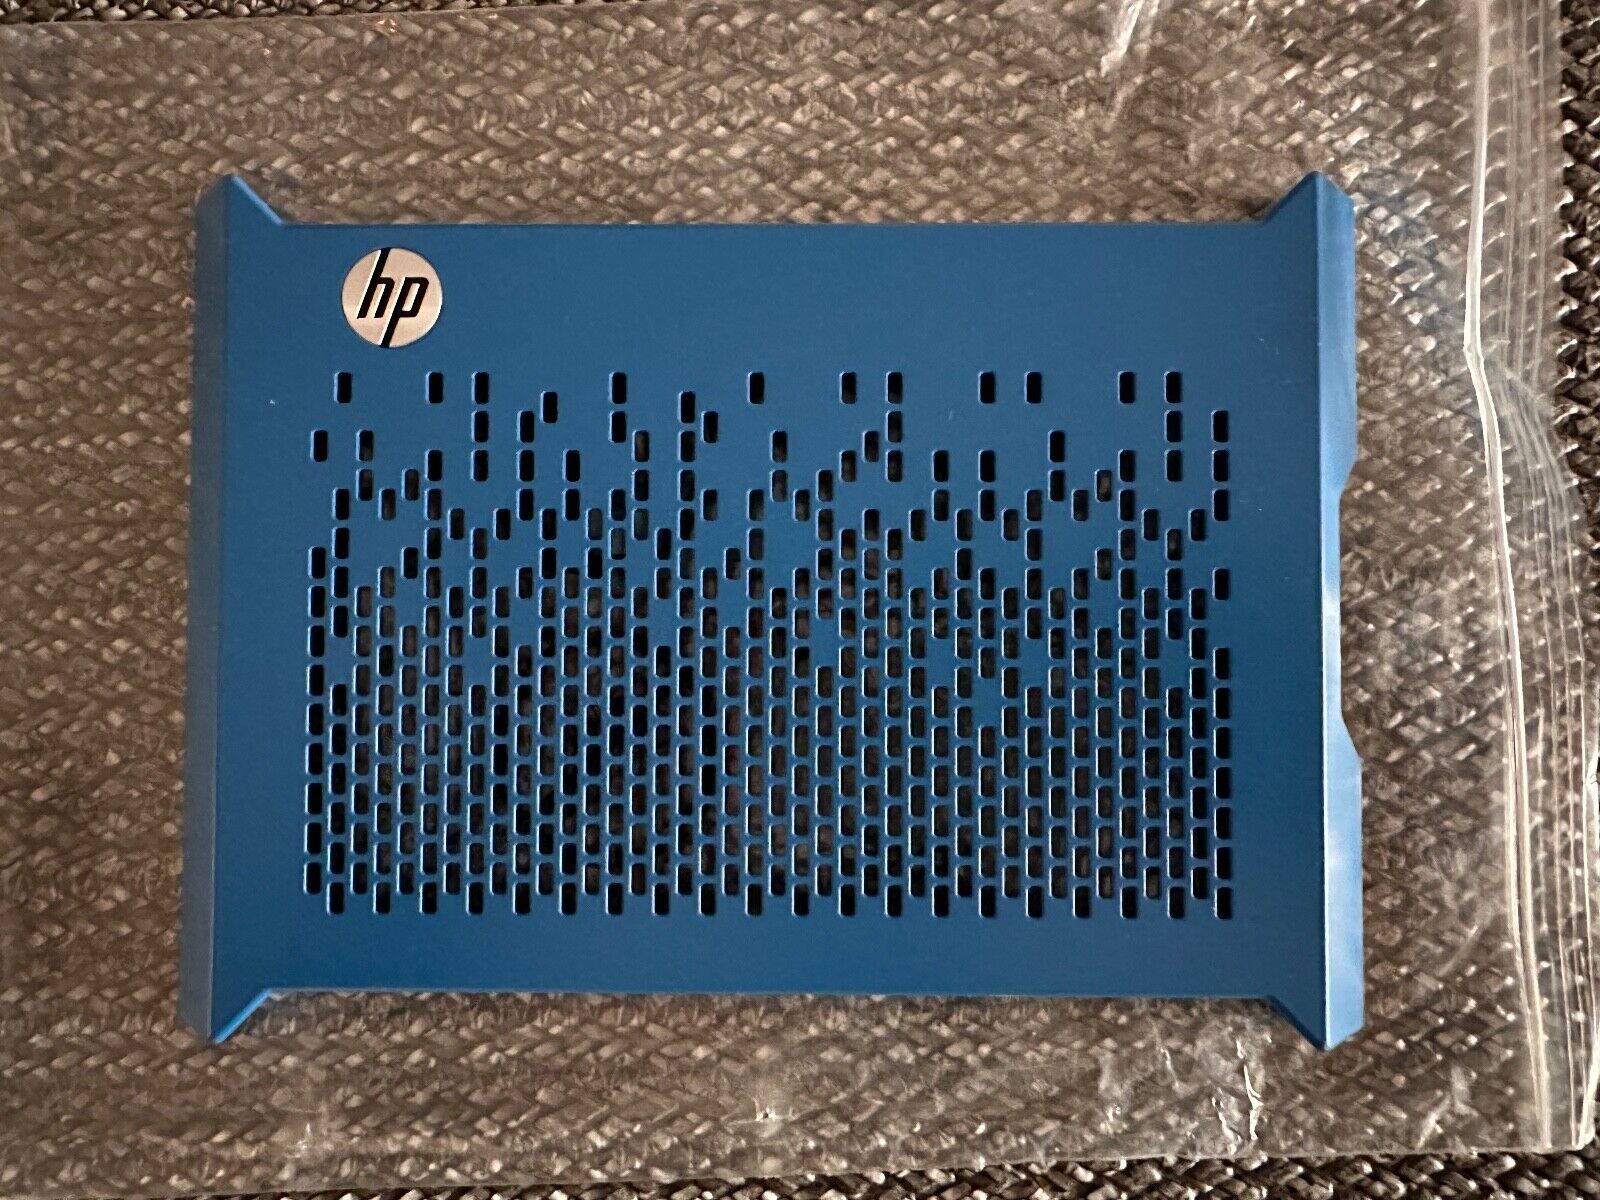 HP Proliant Microserver Gen8 (BLUE COVER ONLY)